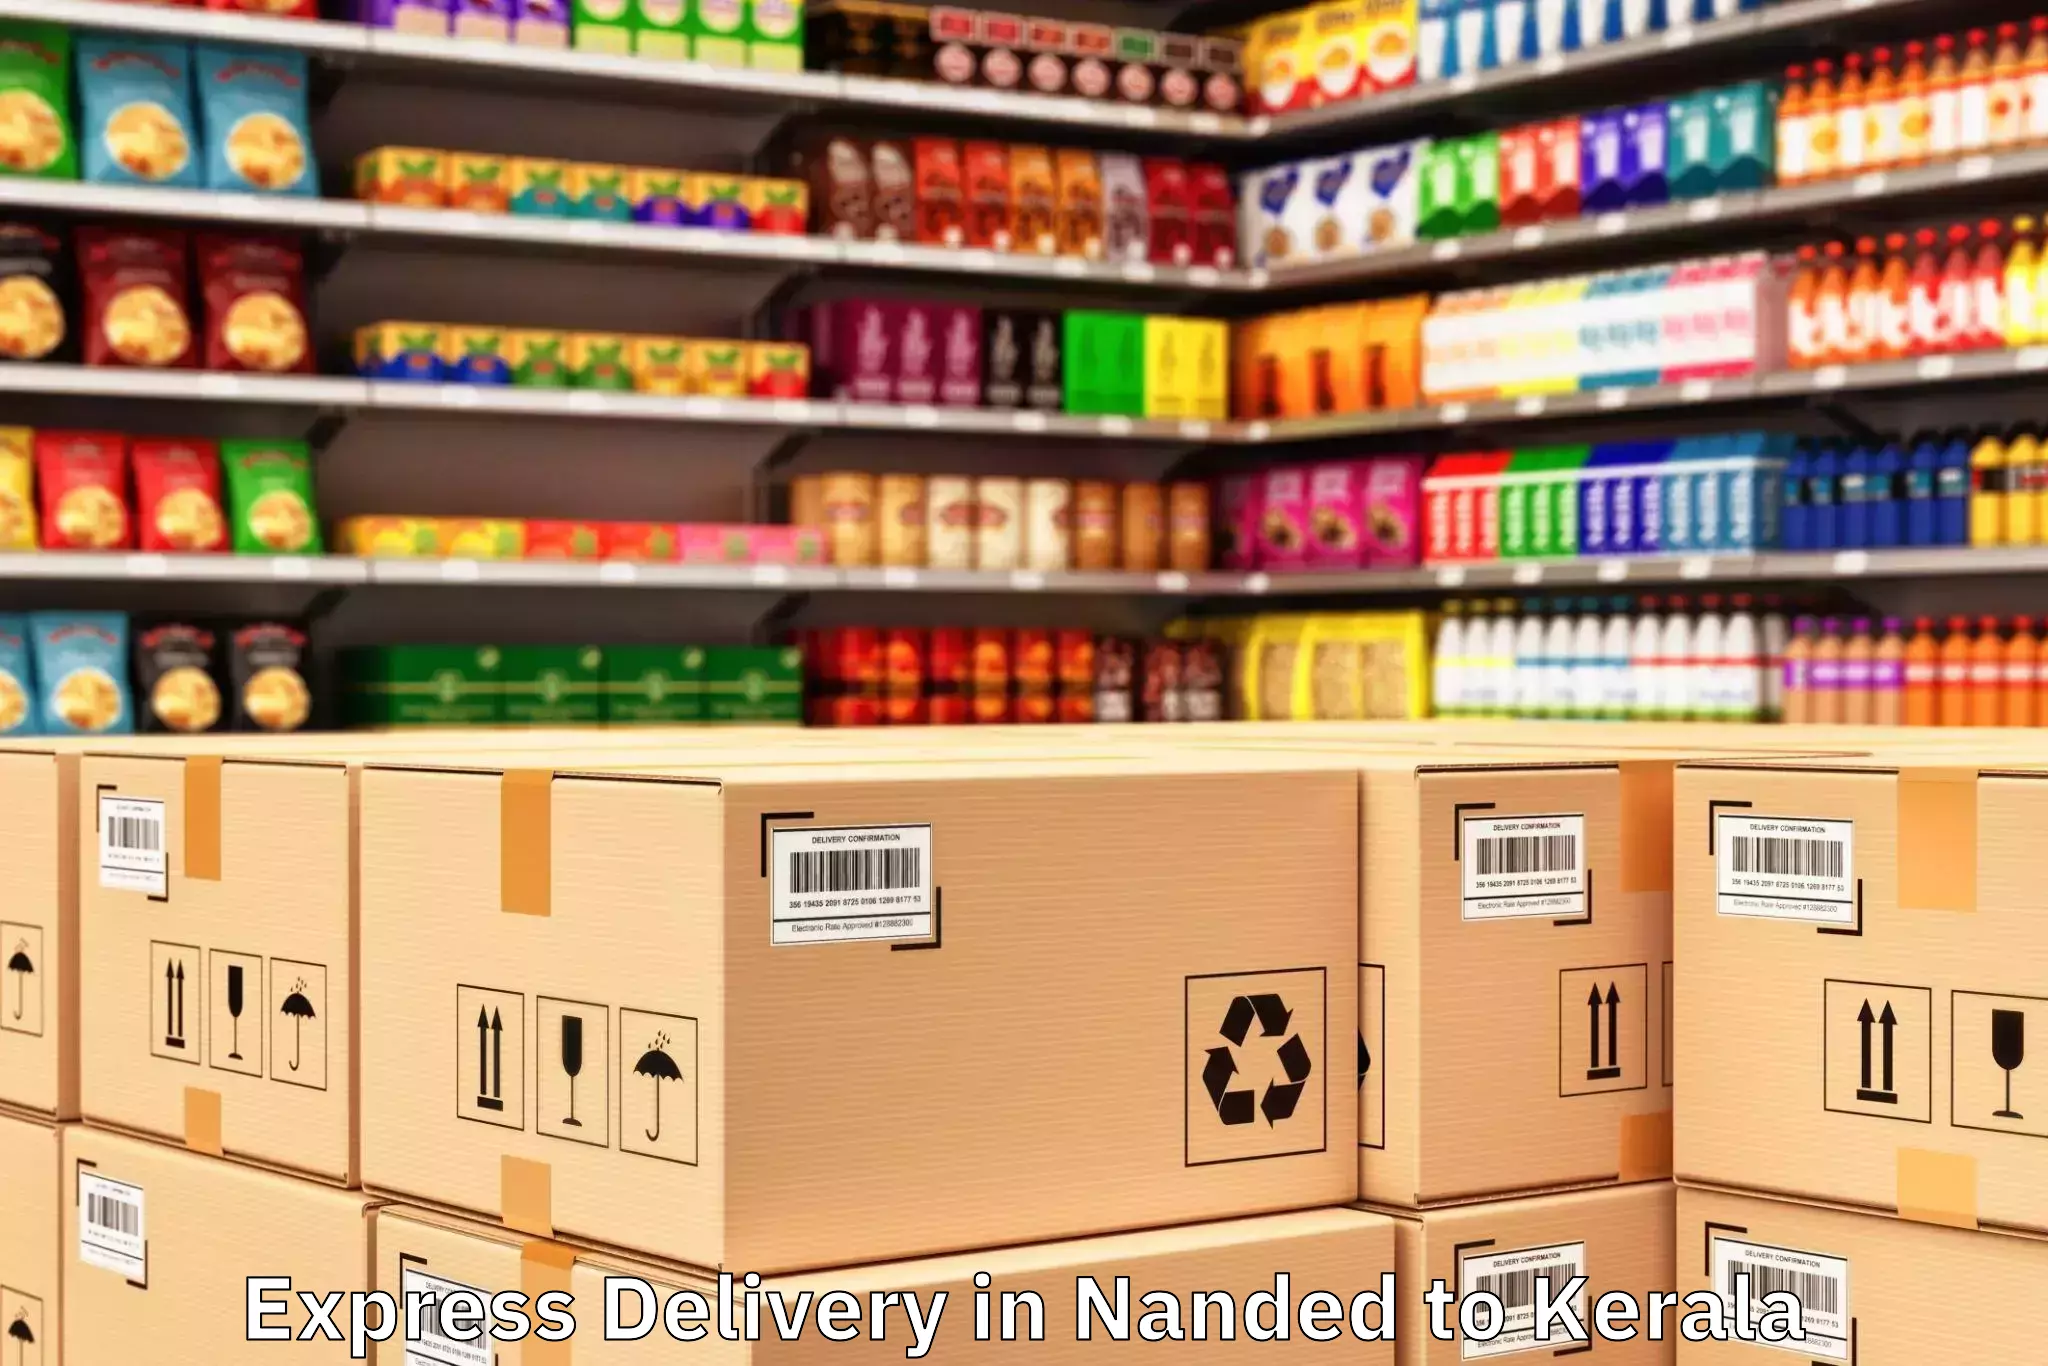 Trusted Nanded to Lulu Mall Thiruvananthapuram Express Delivery